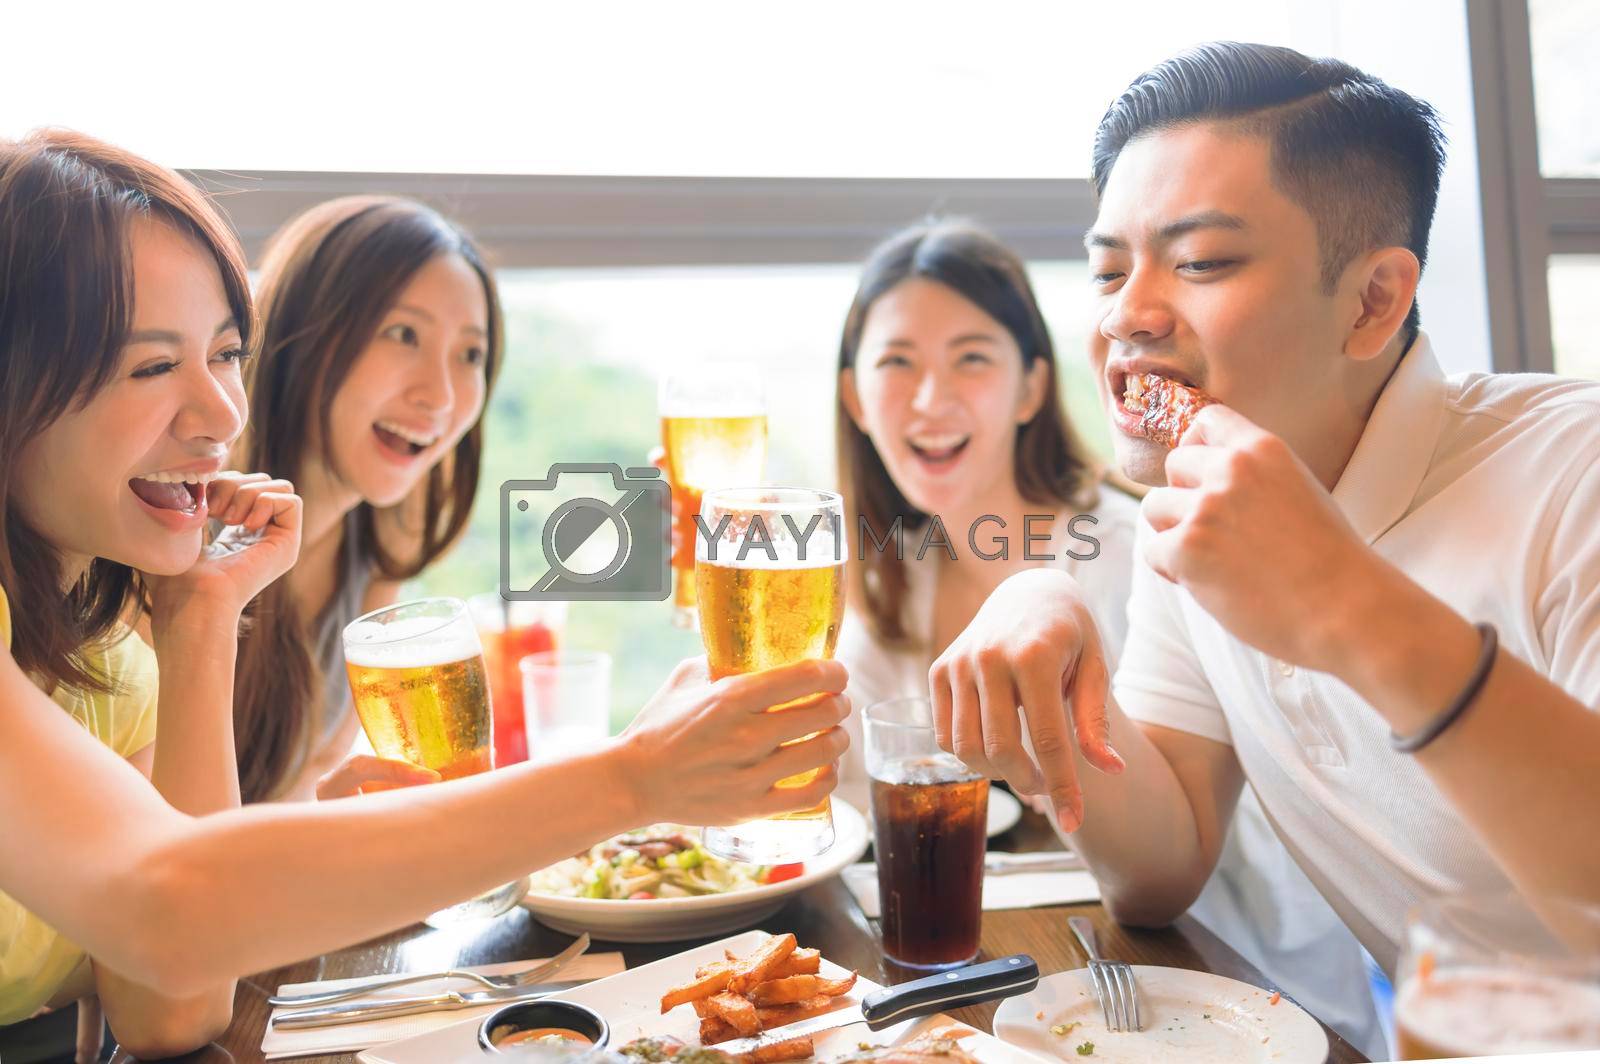 Royalty free image of Happy  friends enjoying food and drink in restaurant by tomwang